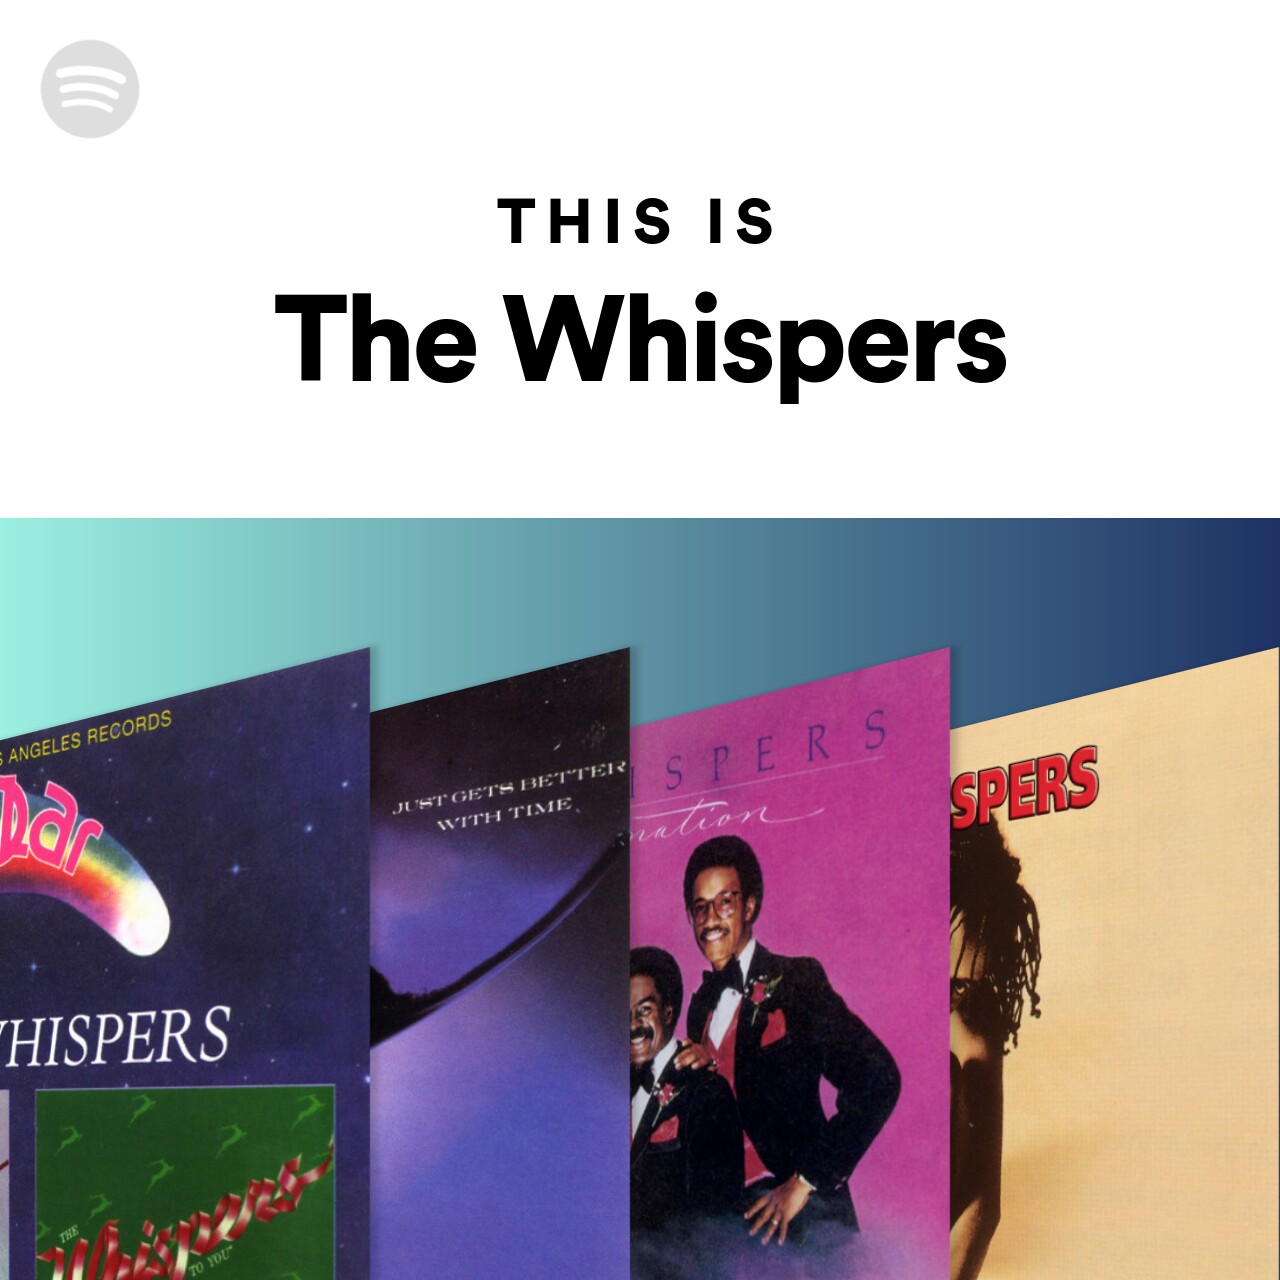 This Is The Whispers